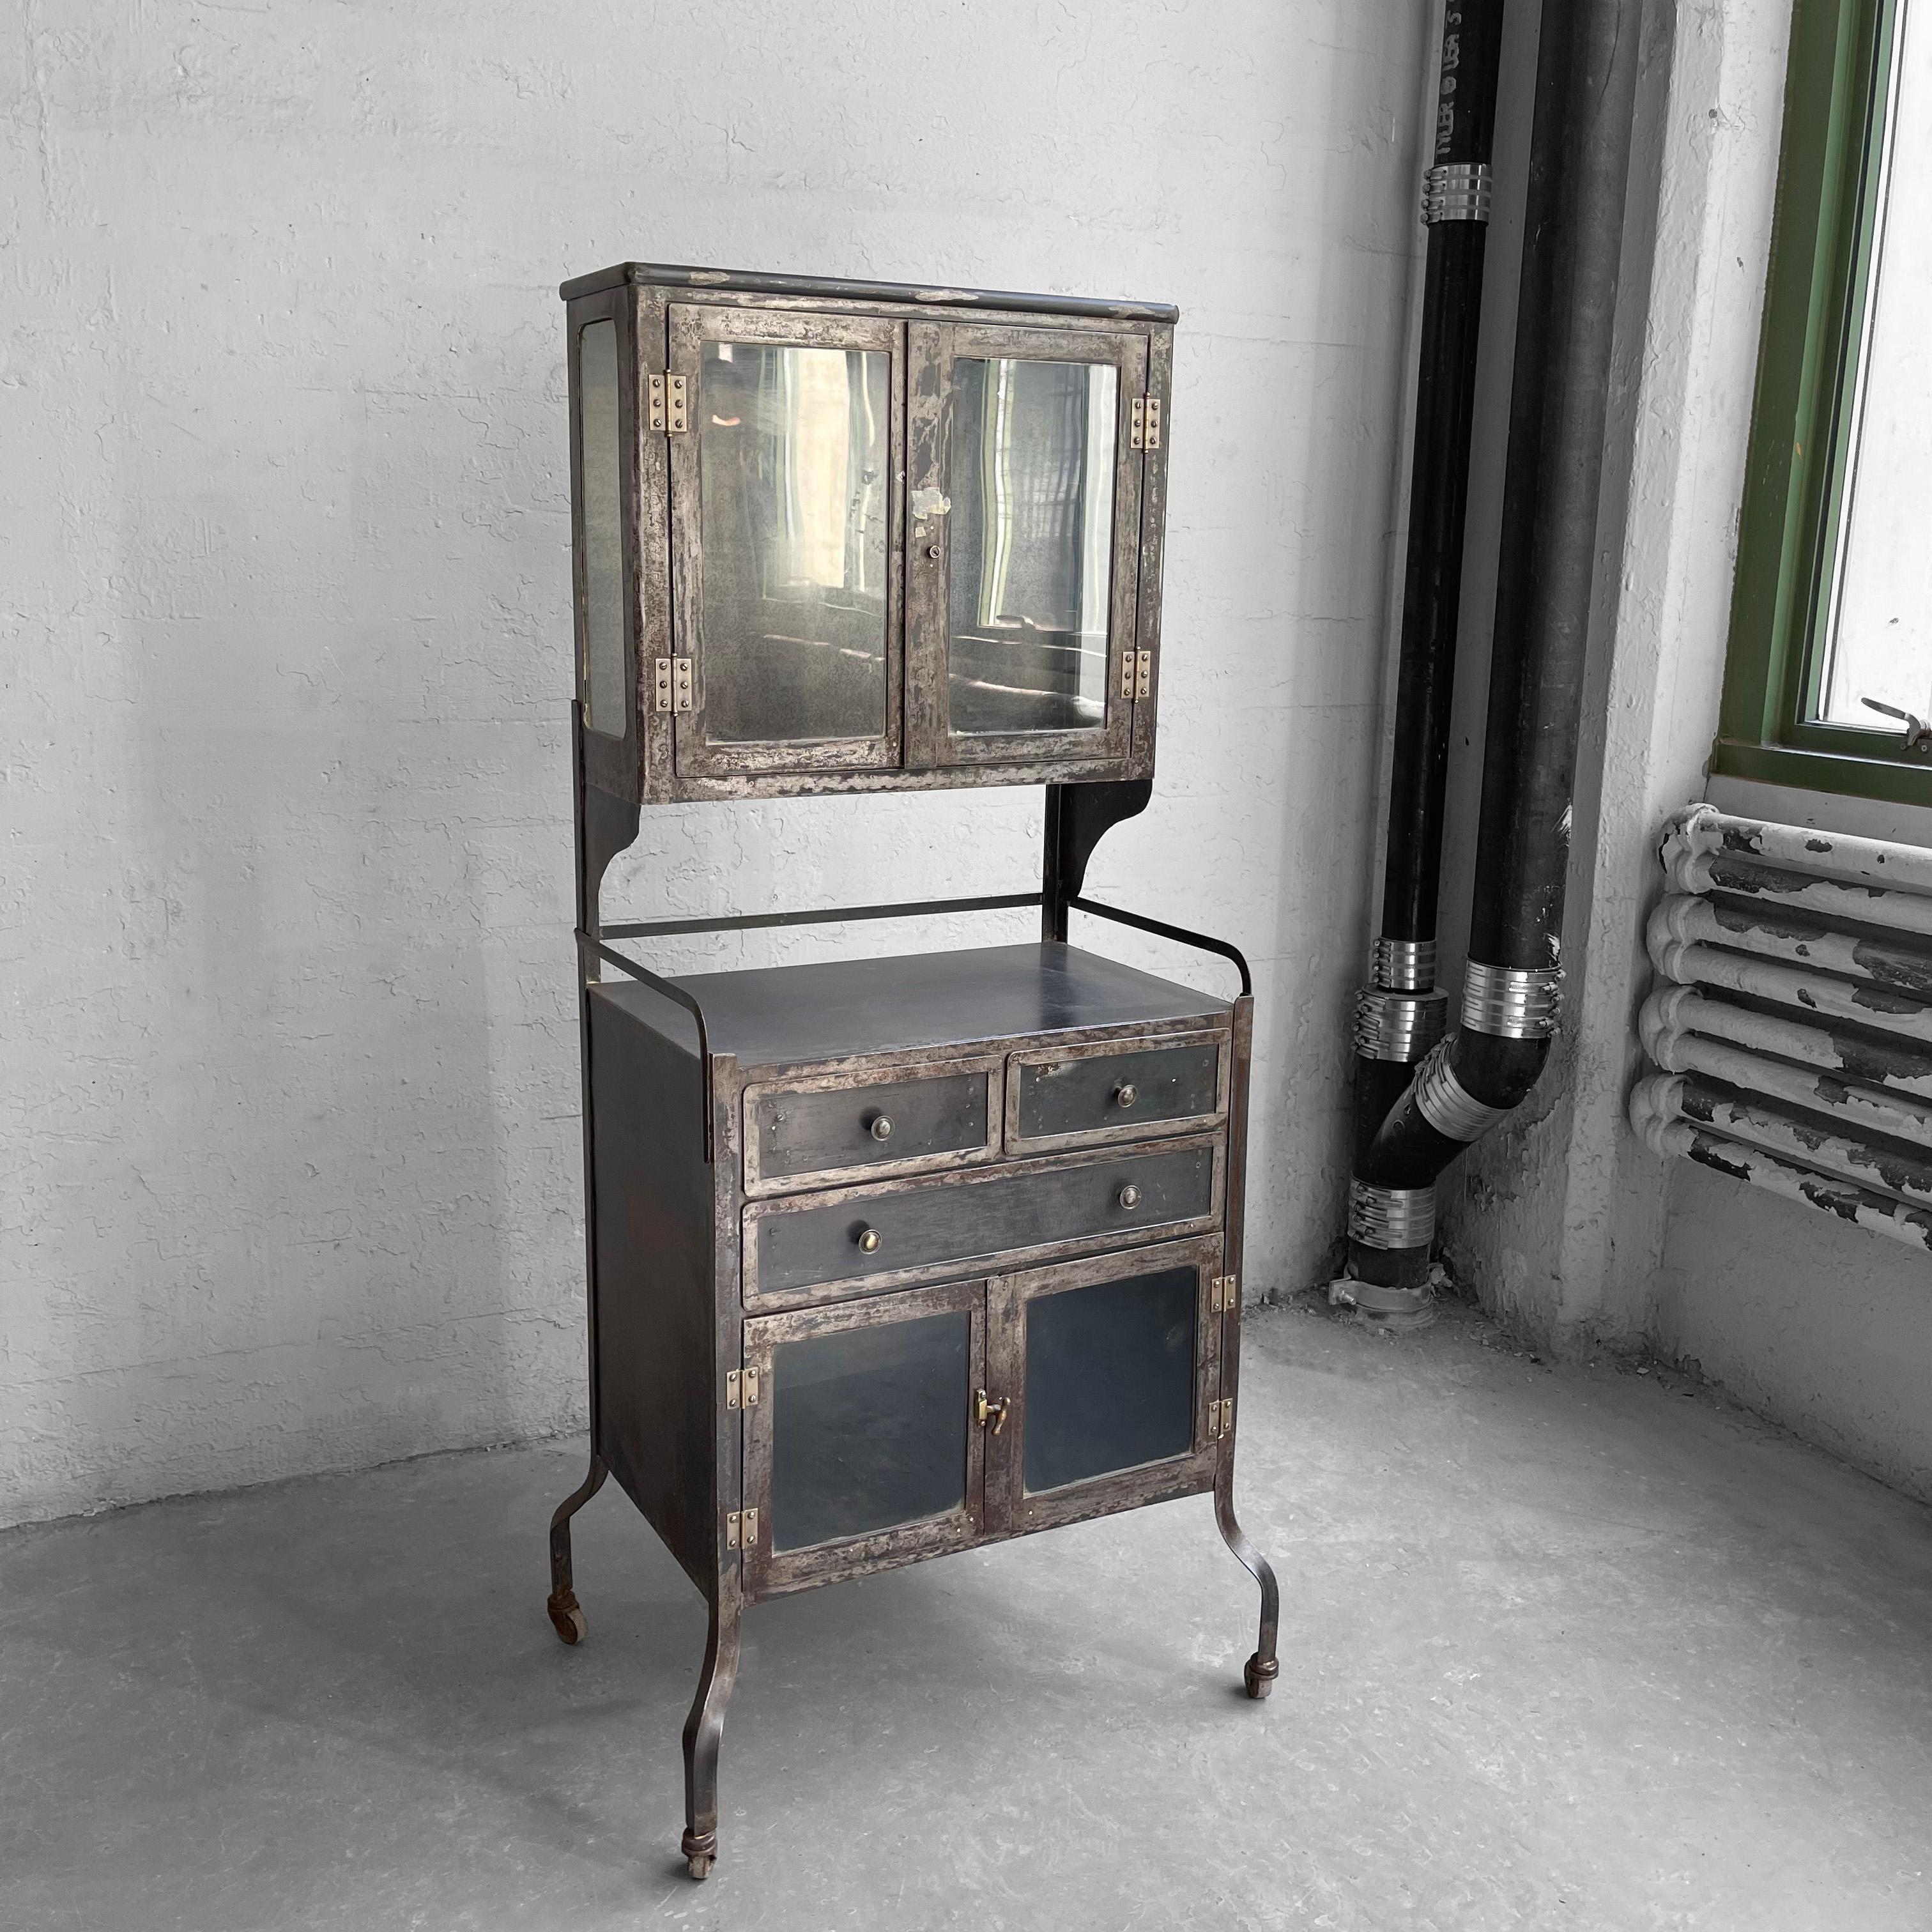 Early 20th century, antique, industrial, brushed steel, dentist apothecary cabinet features drawers and glass front storage on the bottom and recessed, glass front display storage on top. Exterior and interior are brushed steel. Two glass shelves